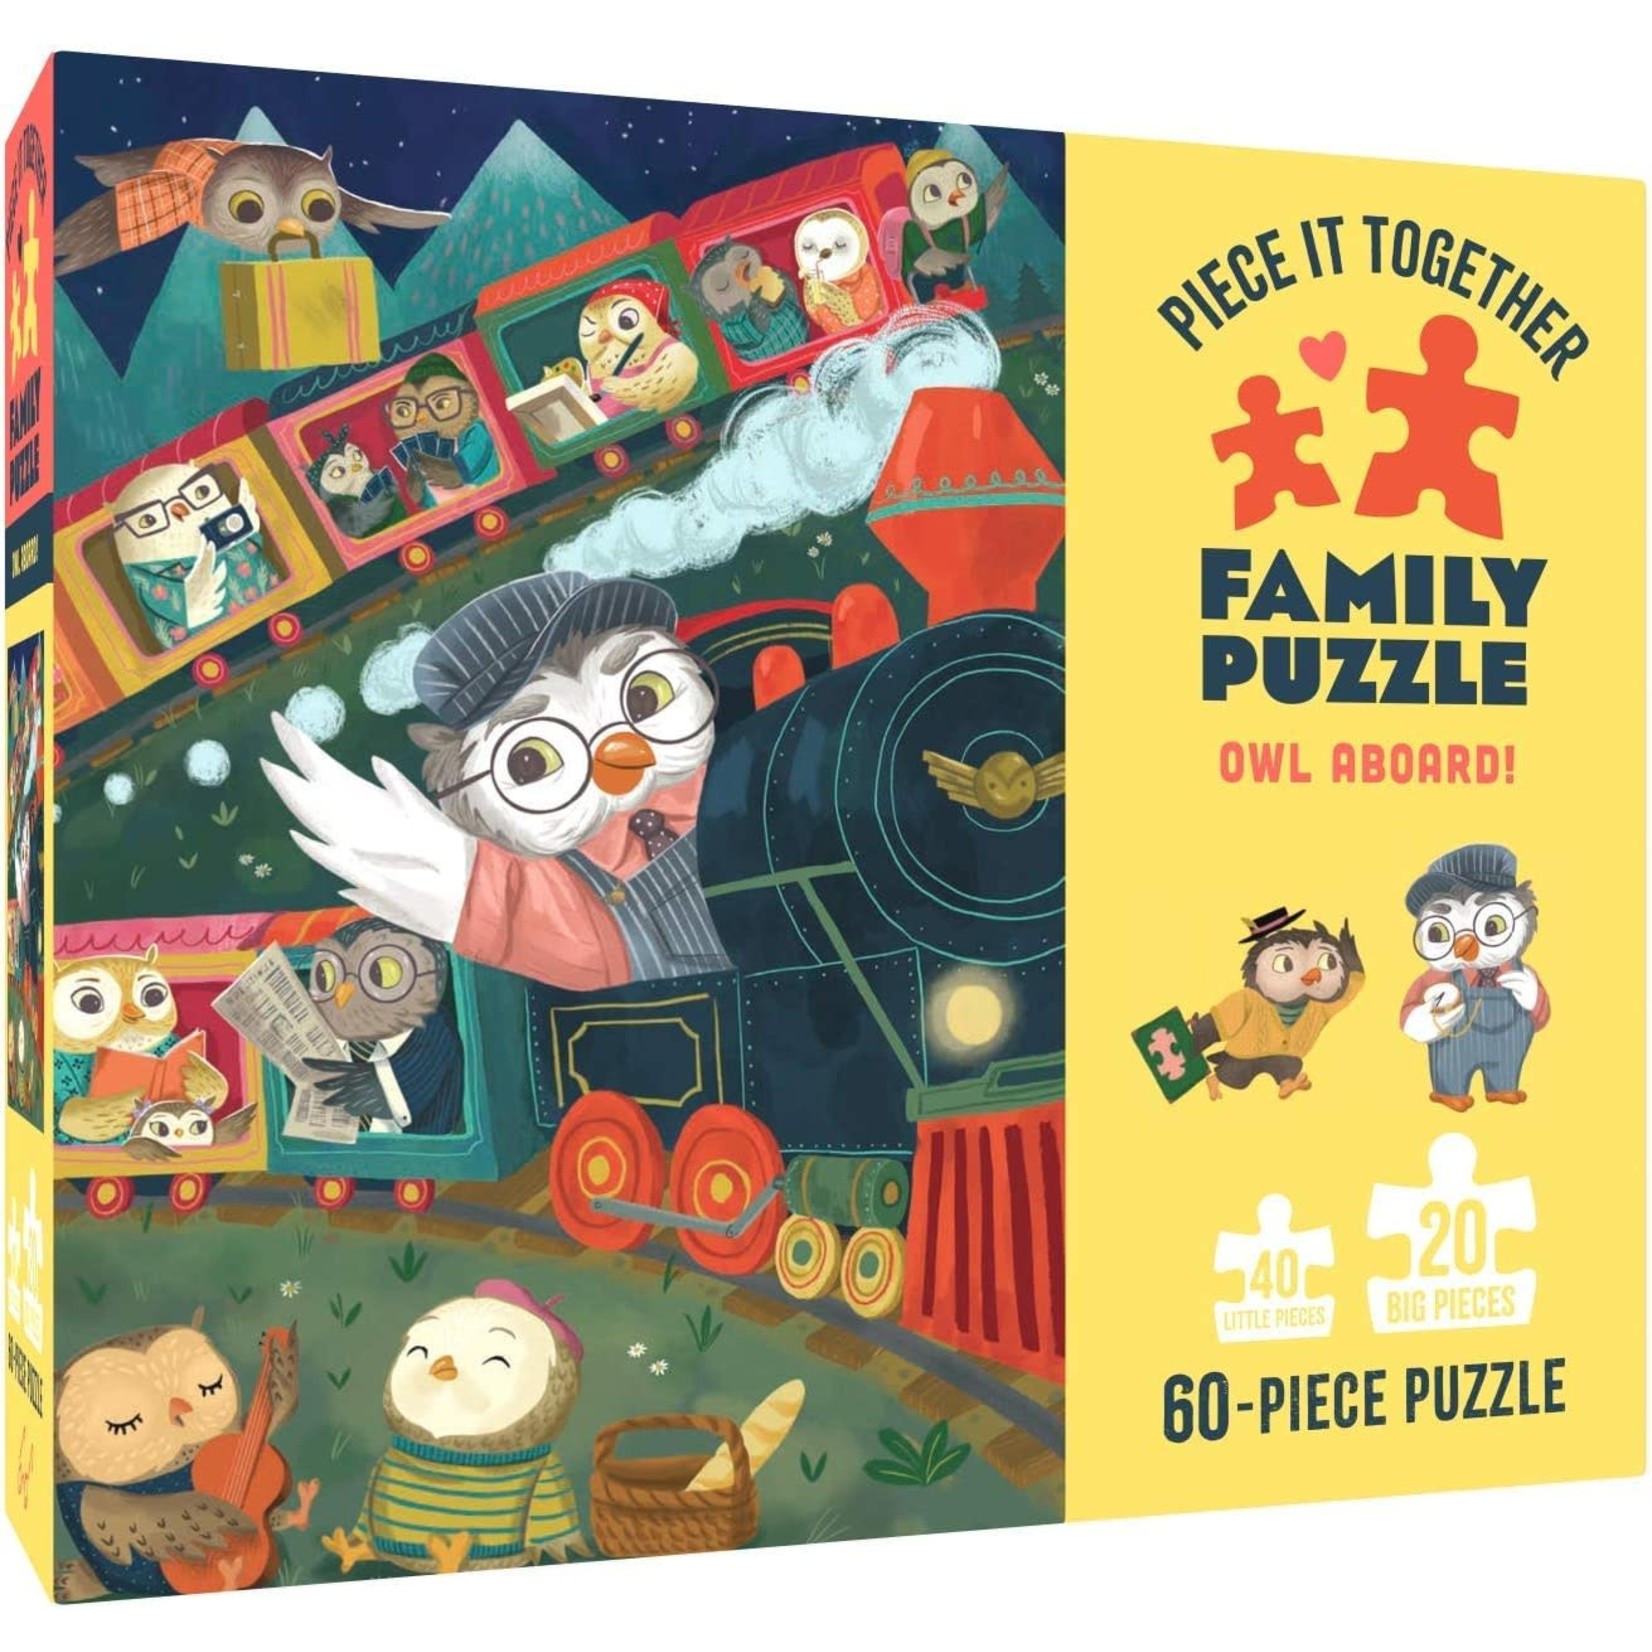 Chronicle Books Piece It Together Family Puzzle: Owl Aboard!